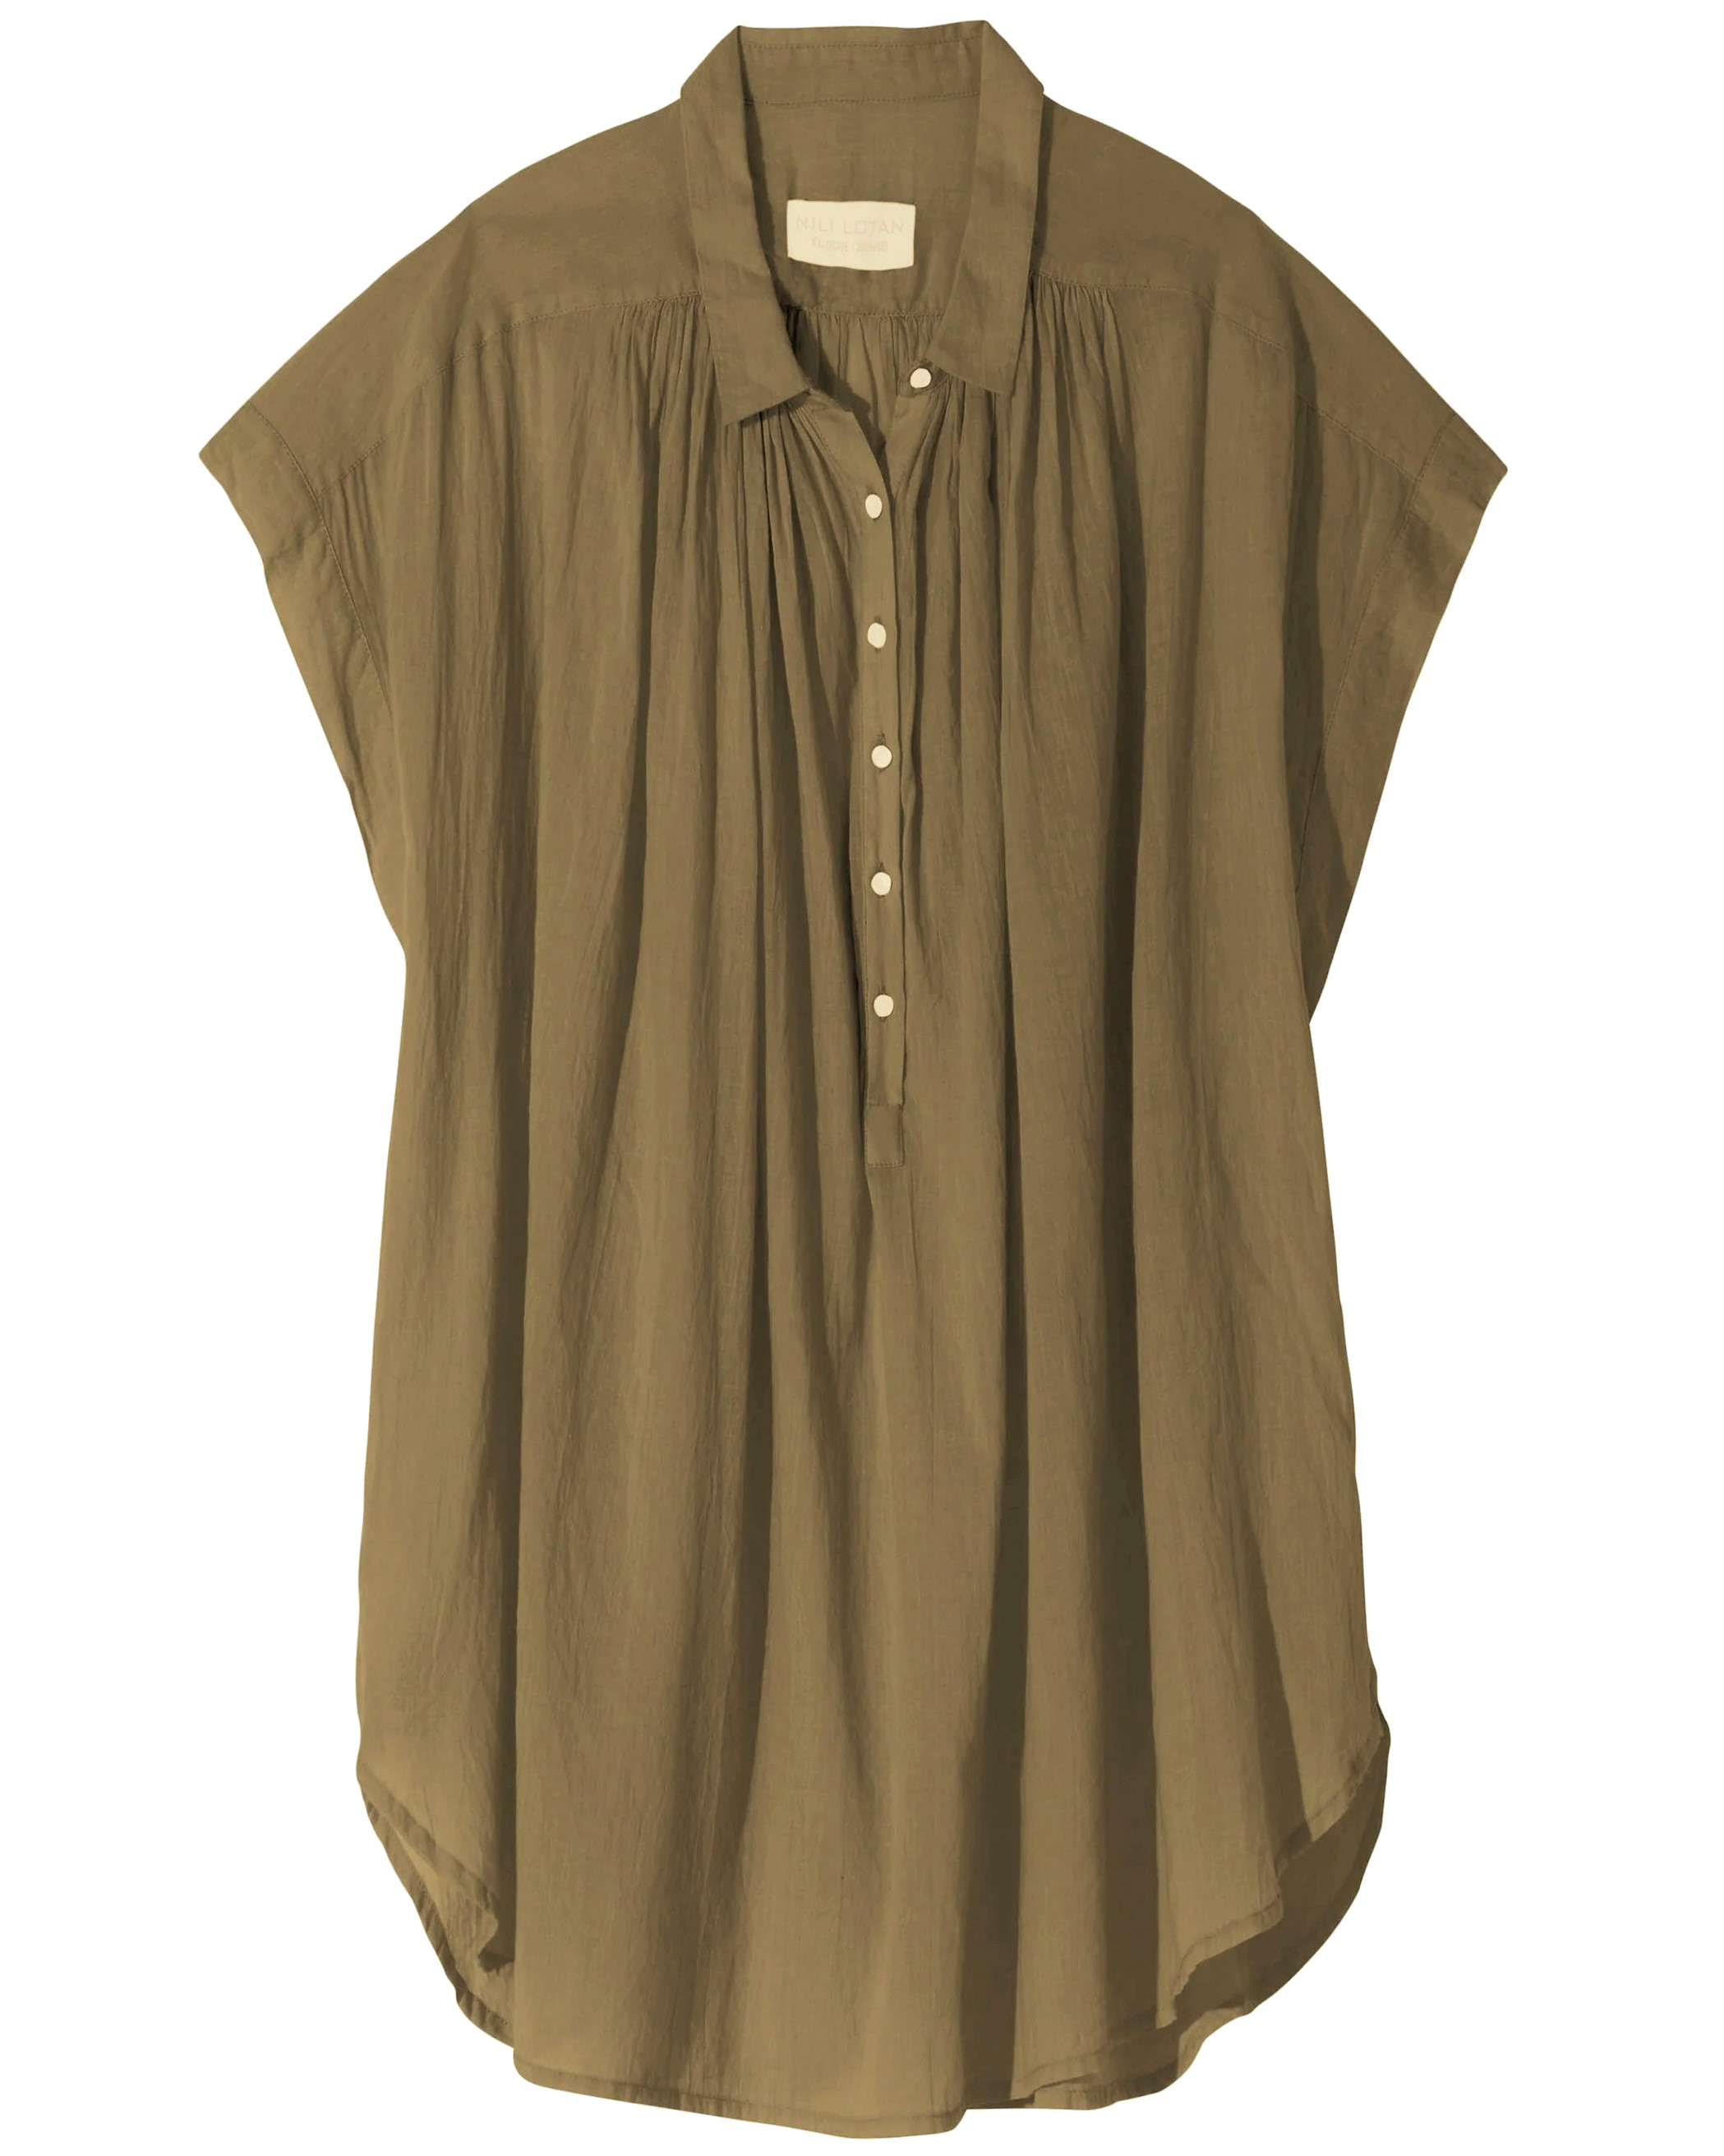 NILI LOTAN Cotton Voile Blouse Normandy in Olive Green XS